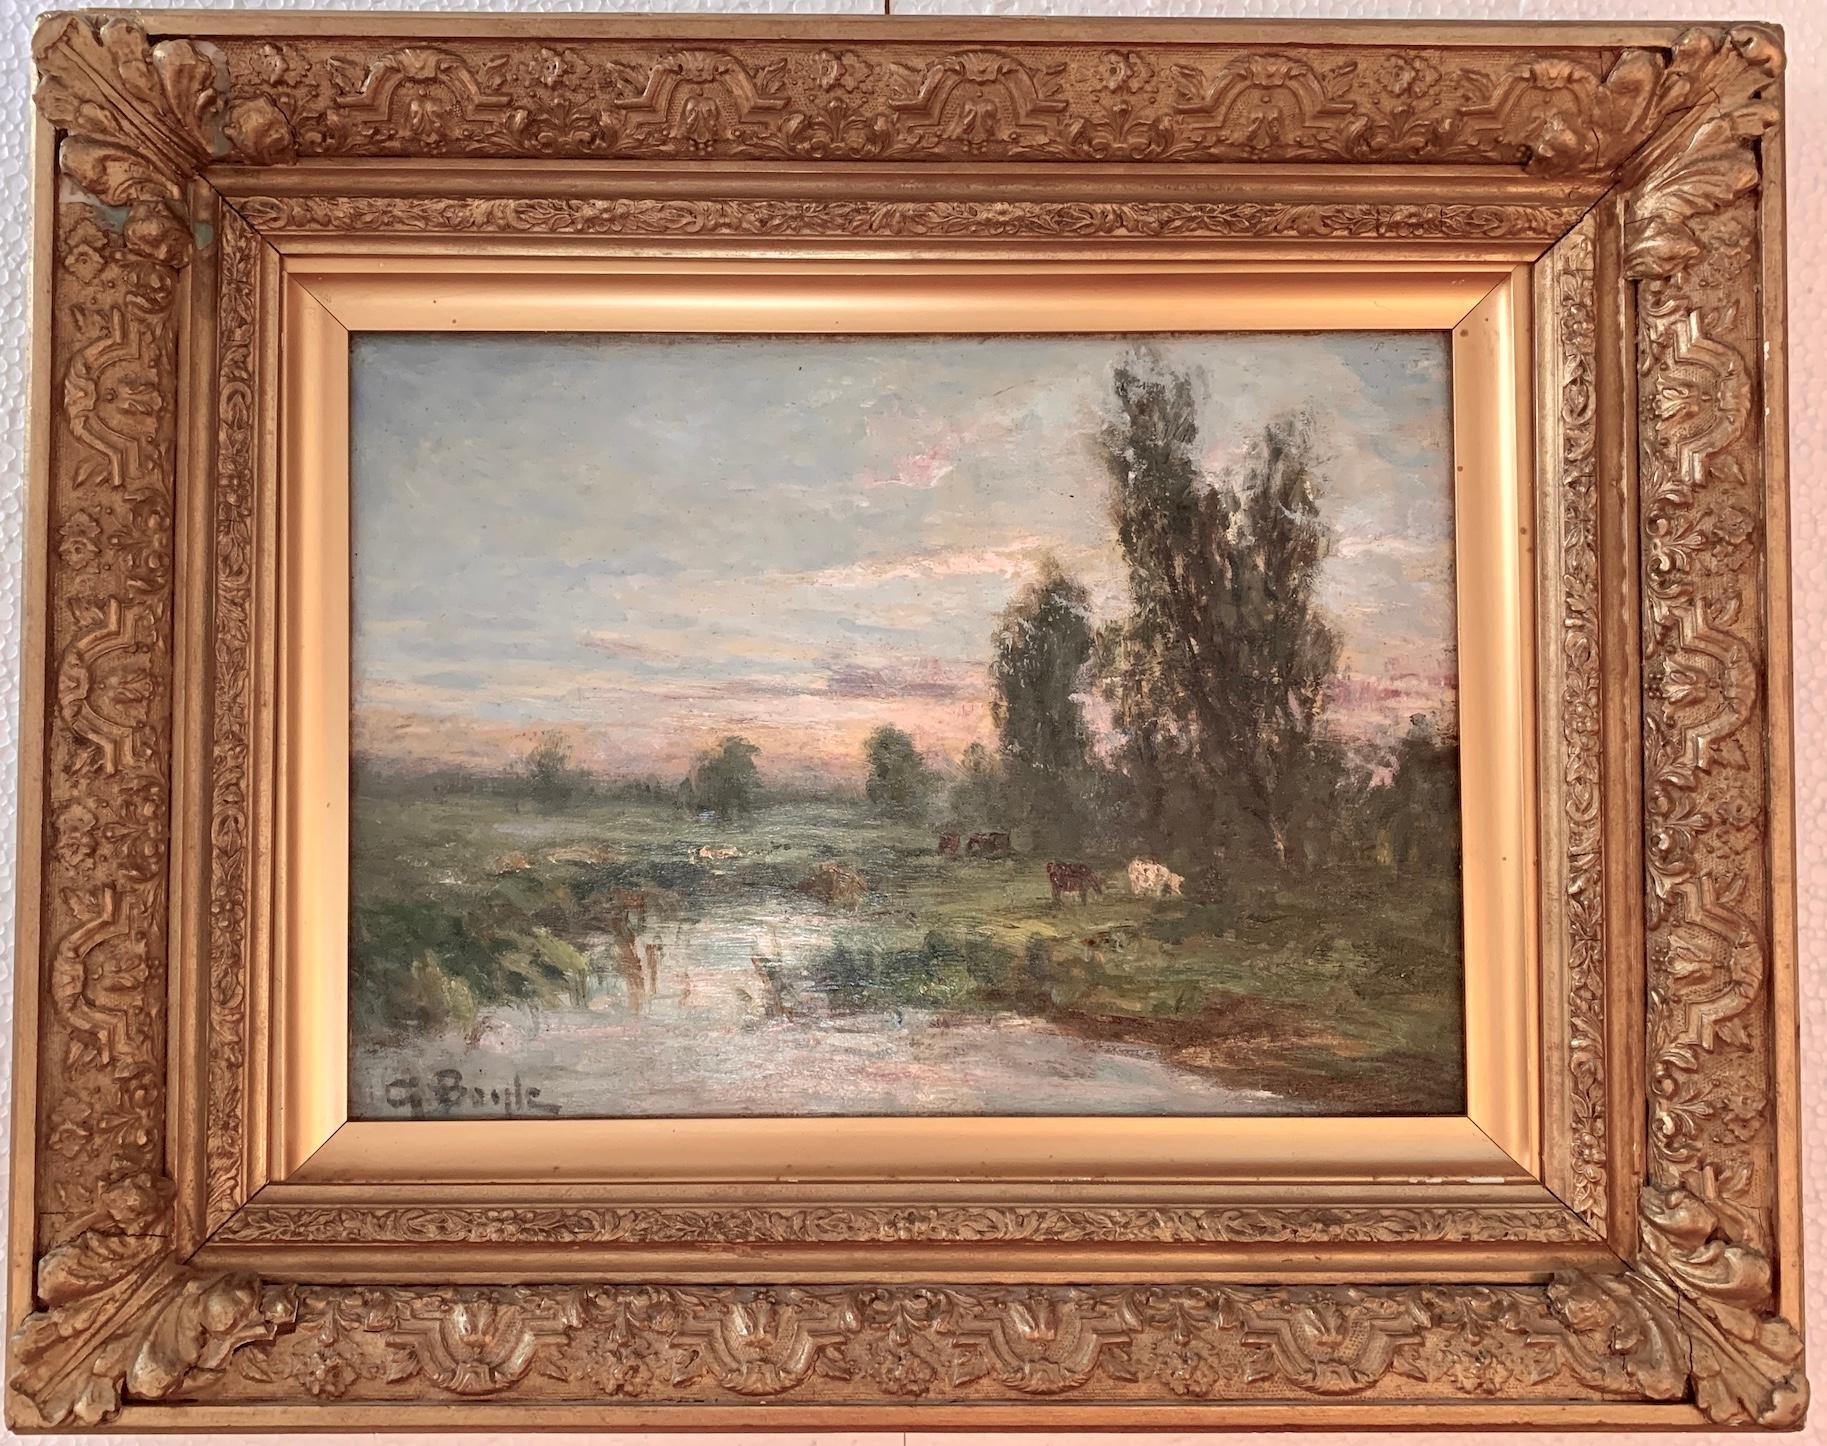 George Boyle Landscape Painting - French impressionist landscape, Barbizon forest, with river and cows at Sunset